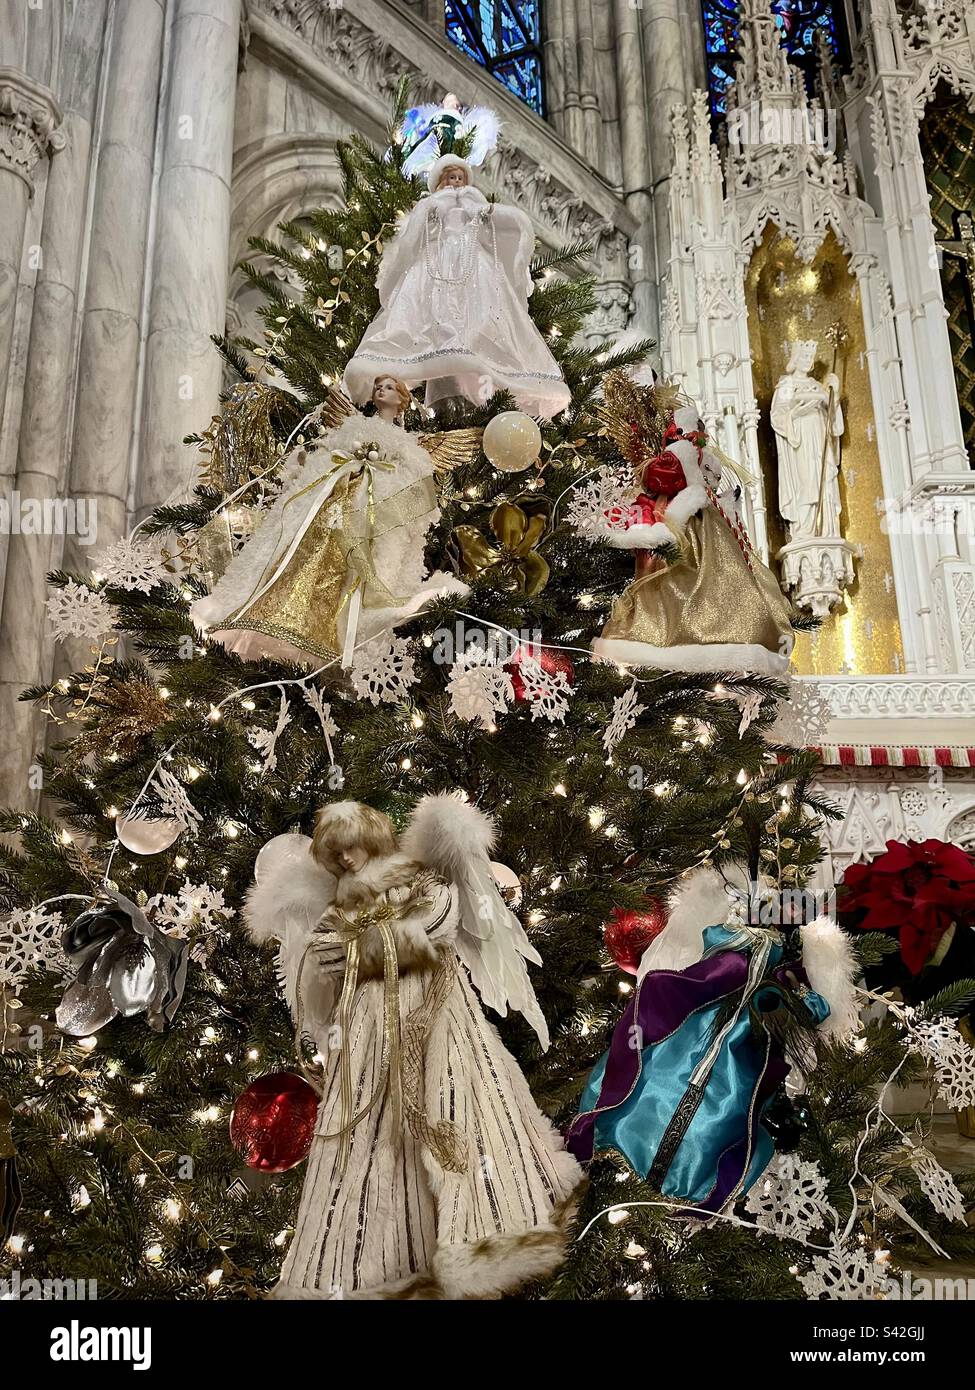 Christmas tree decorated with angels inside St. Patrick's Cathedral in New York. Photo taken in New York in December 2022 Stock Photo